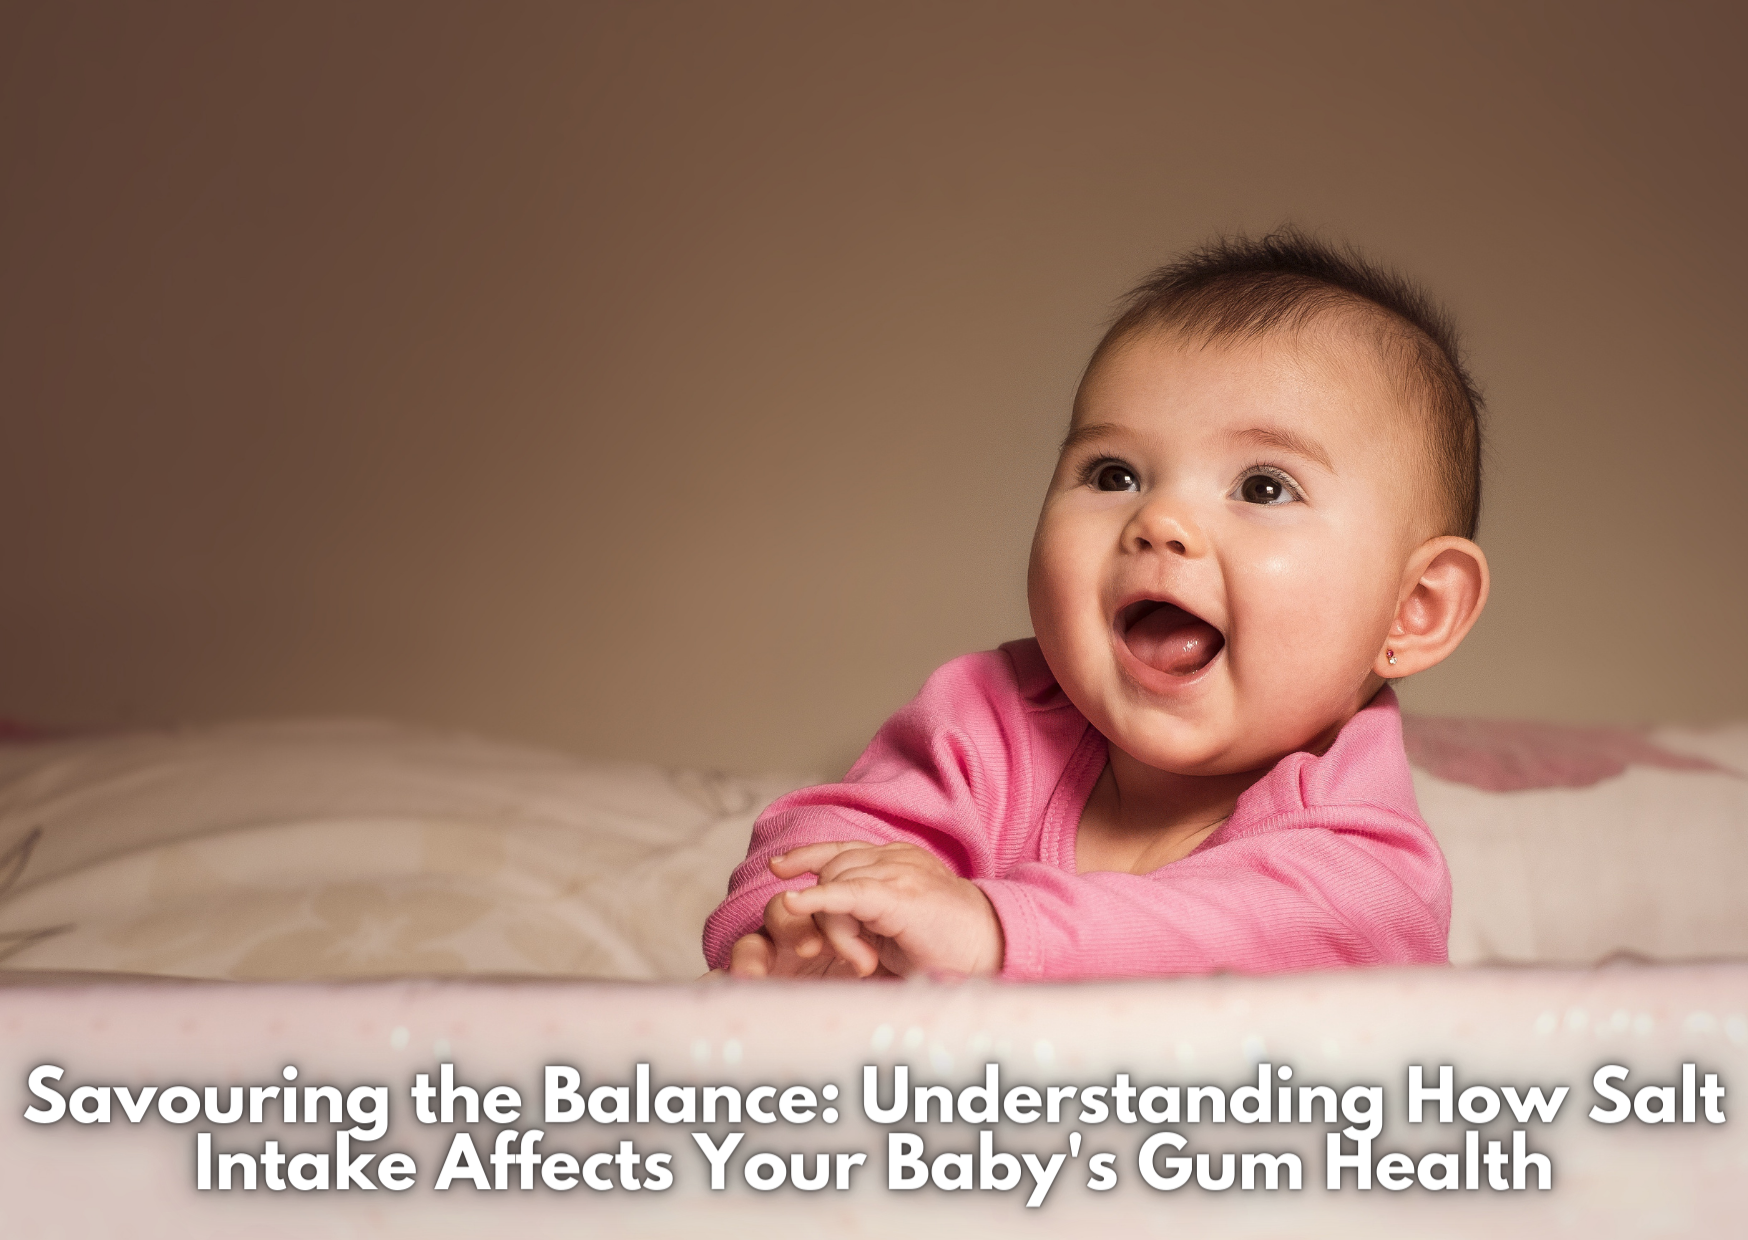 Savouring the Balance: Understanding How Salt Intake Affects Your Baby's Gum Health